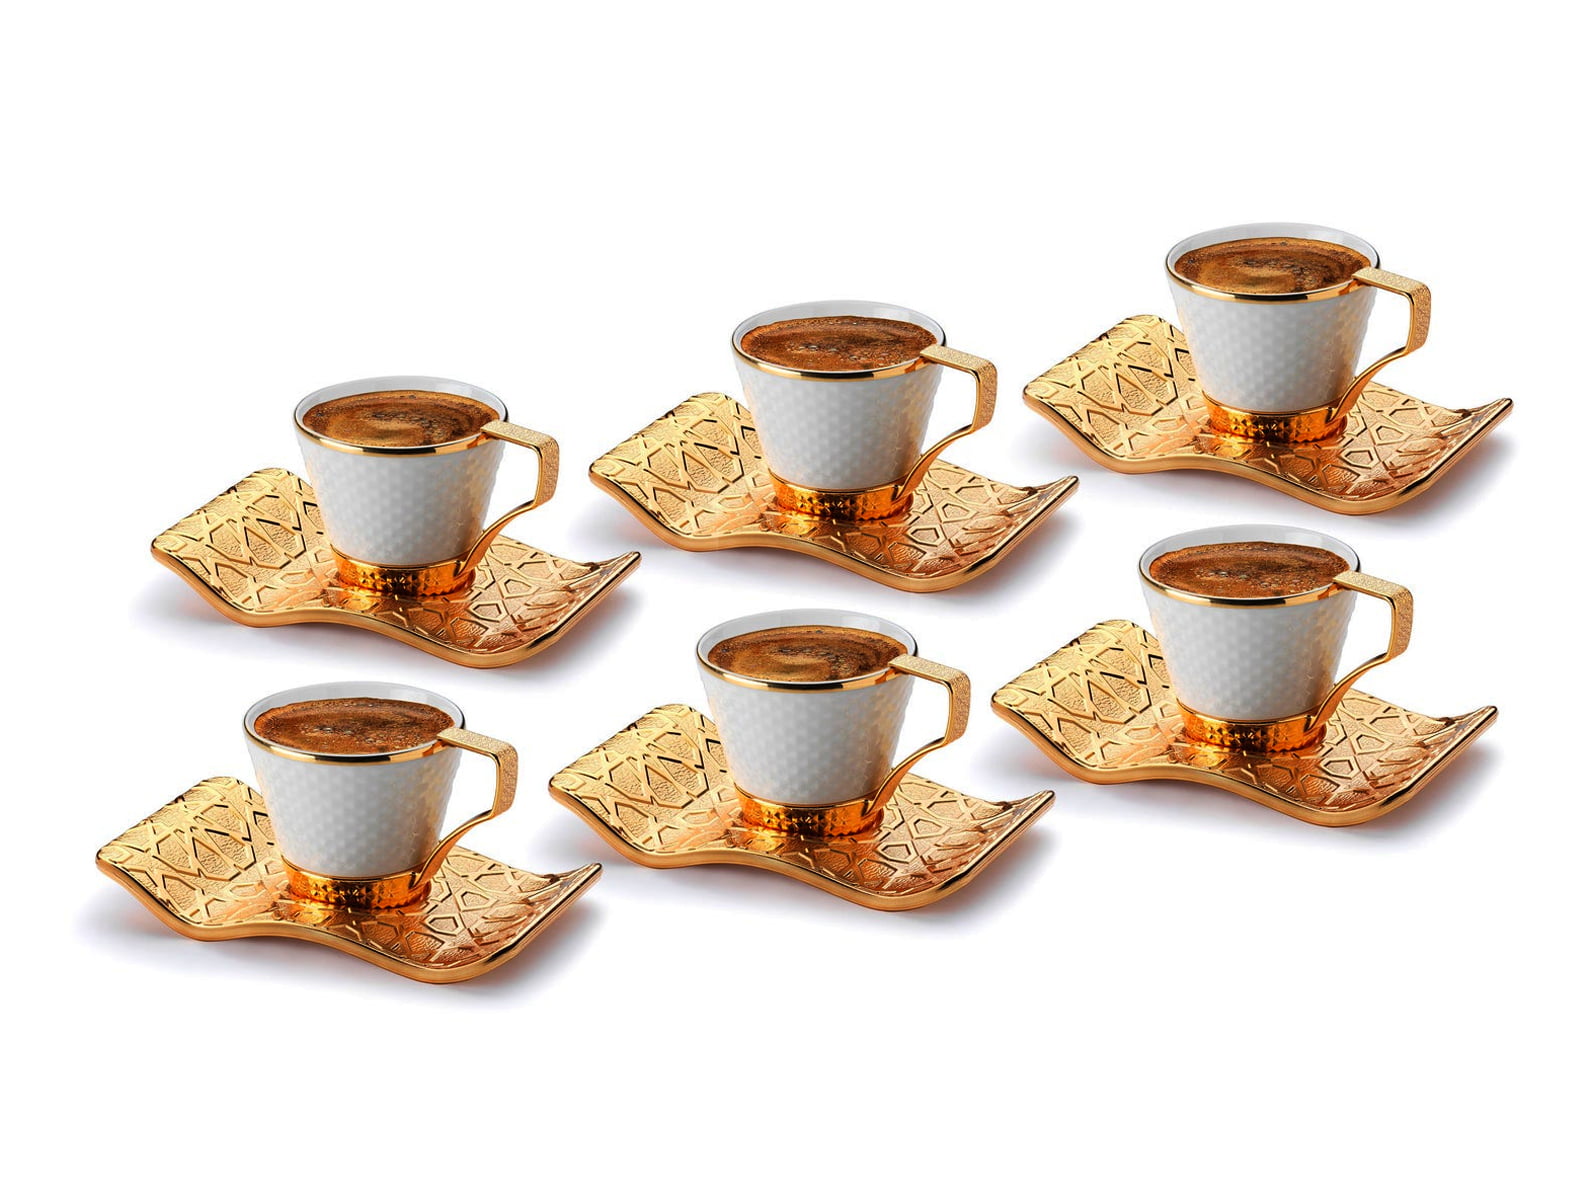 https://traditionalturk.com/wp-content/uploads/2021/05/luxury-gold-color-turkish-coffee-cup-set-for-six-person-3.jpg